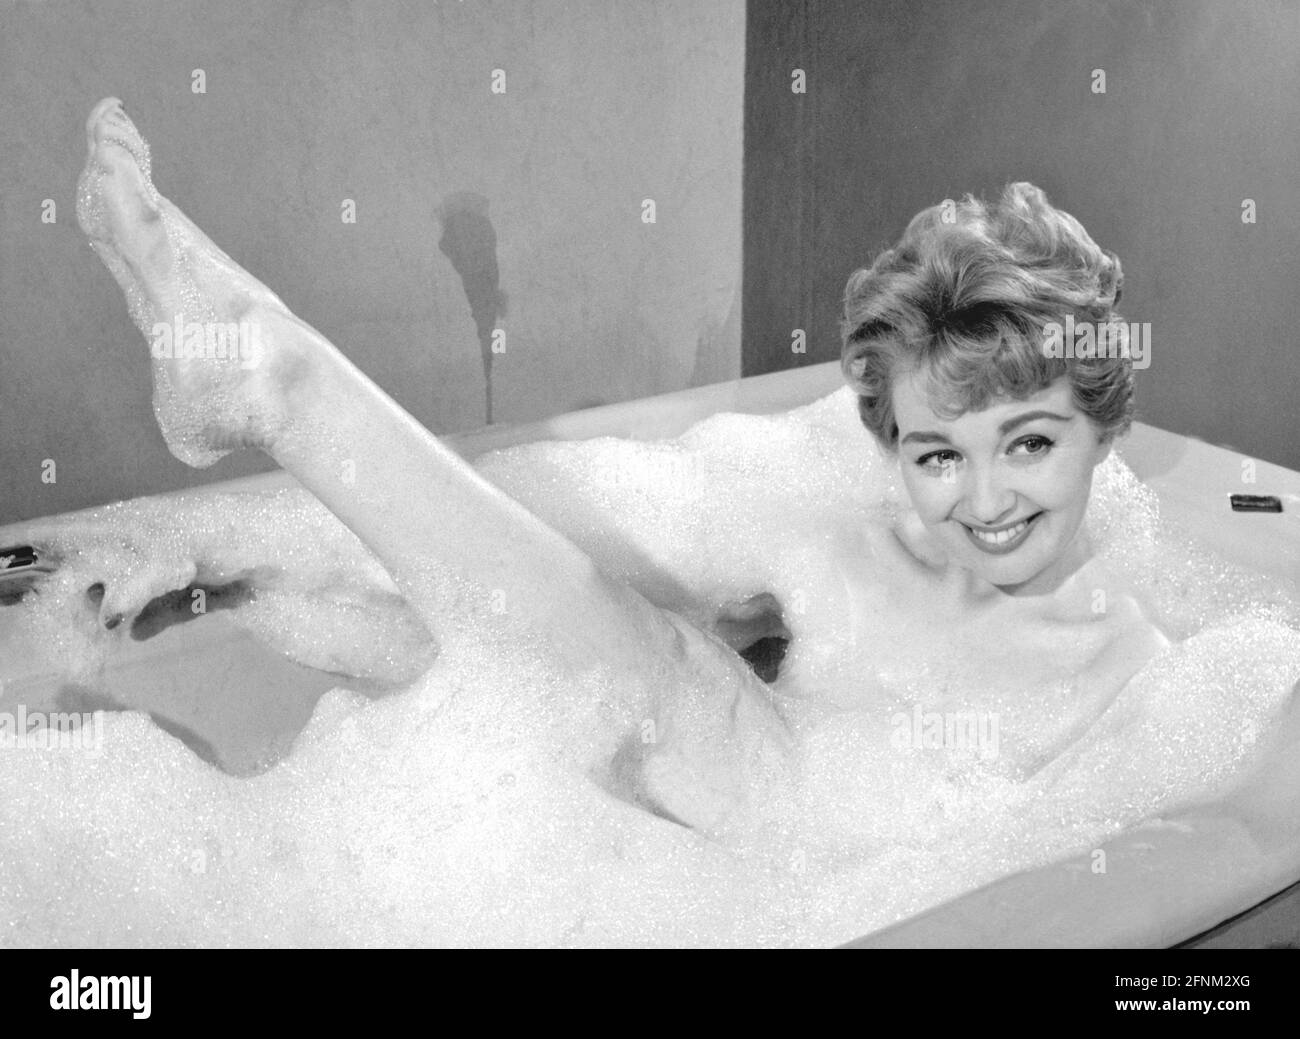 Ryan, Marion, 4.2.1931 - 15.1.1999, British singer (pop), half length, in bathtub, ADDITIONAL-RIGHTS-CLEARANCE-INFO-NOT-AVAILABLE Stock Photo